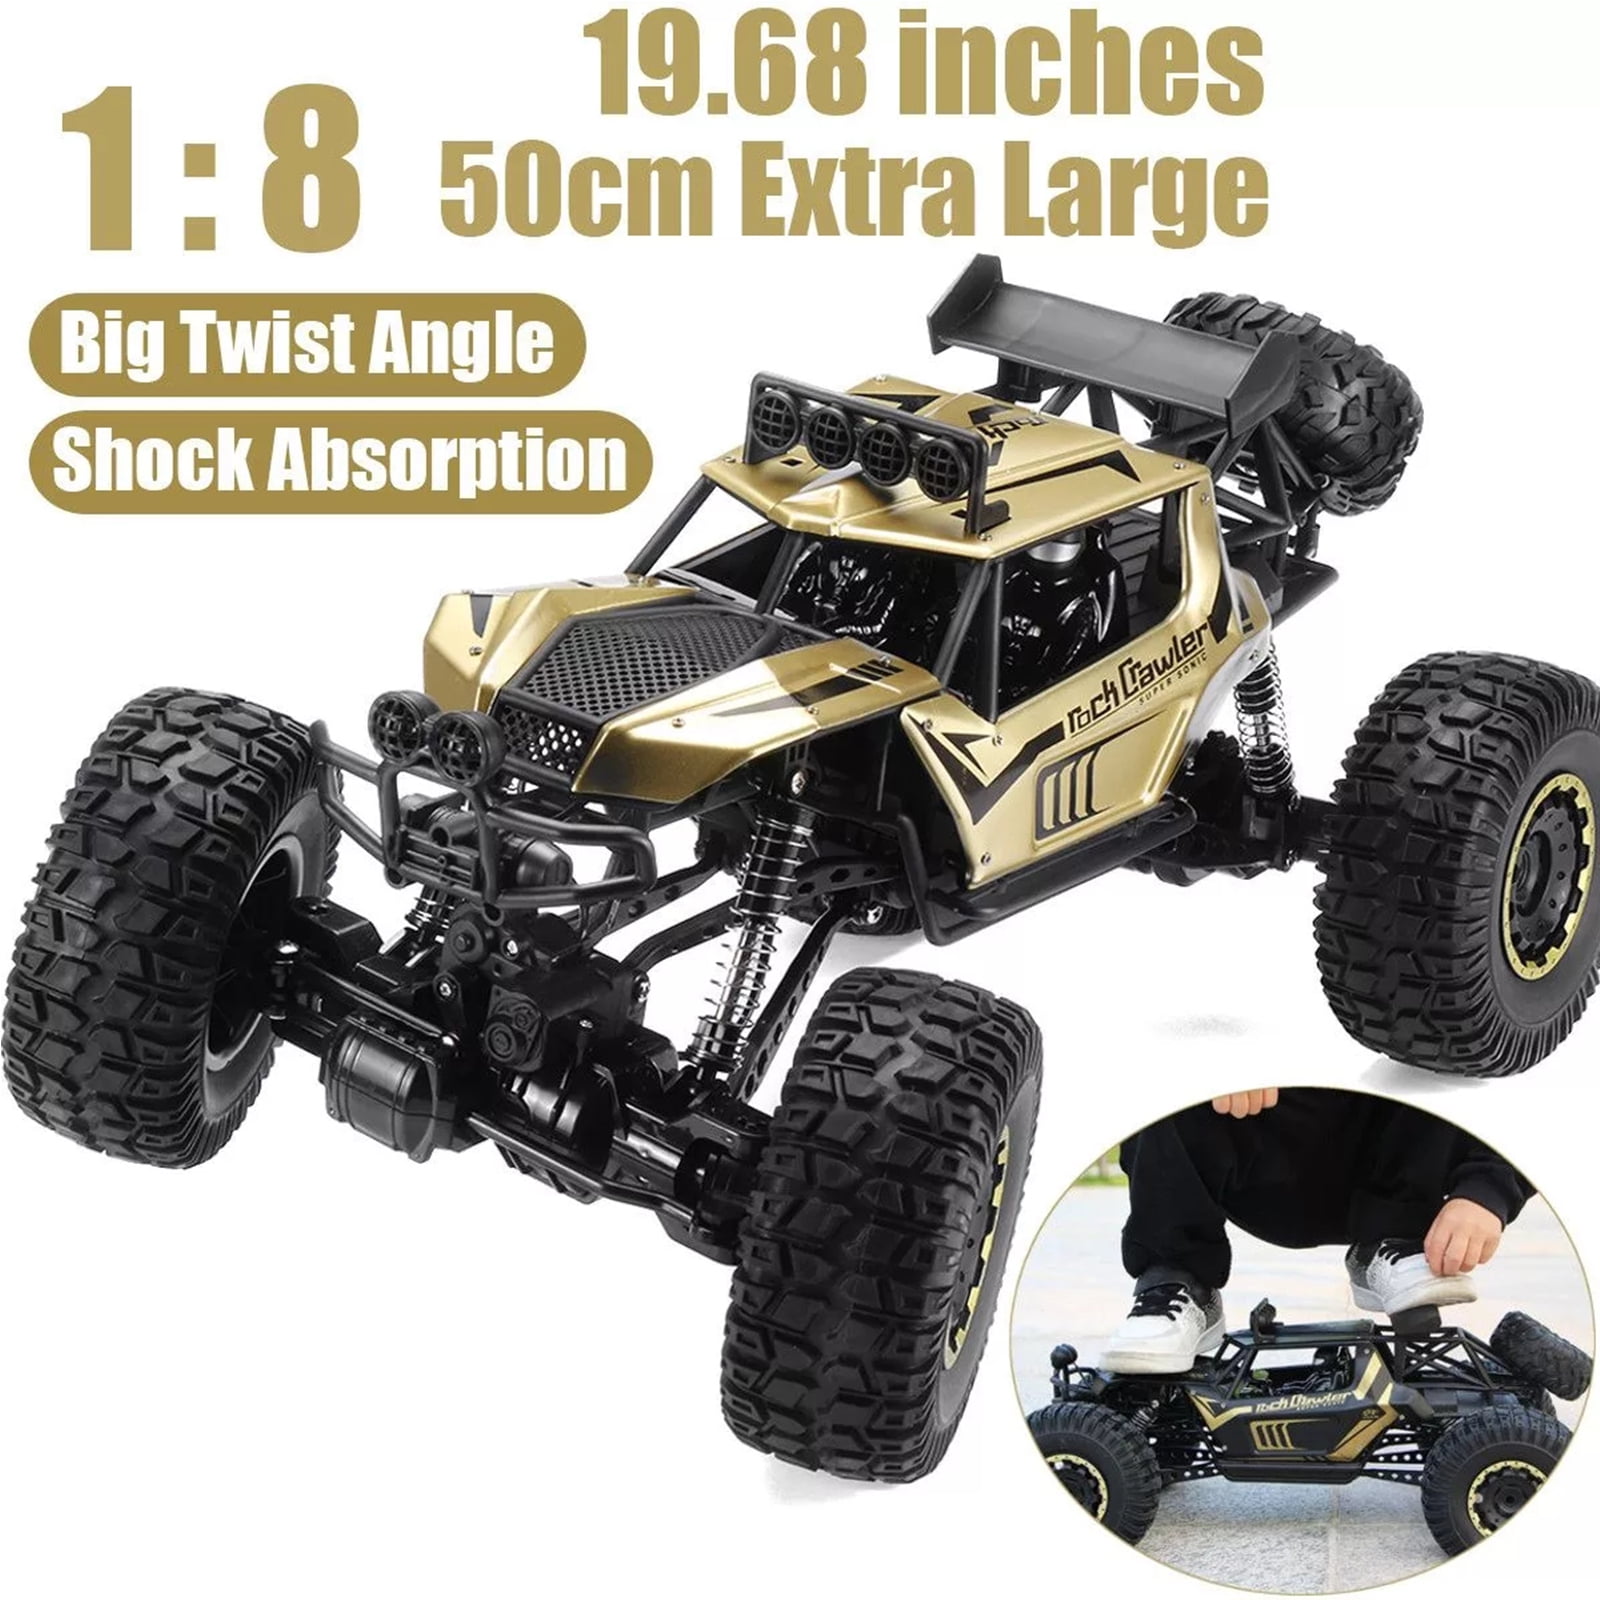 Details about   New RC Cars Radio Control 2.4G 4CH High-Speed Race Car Toys for Children 